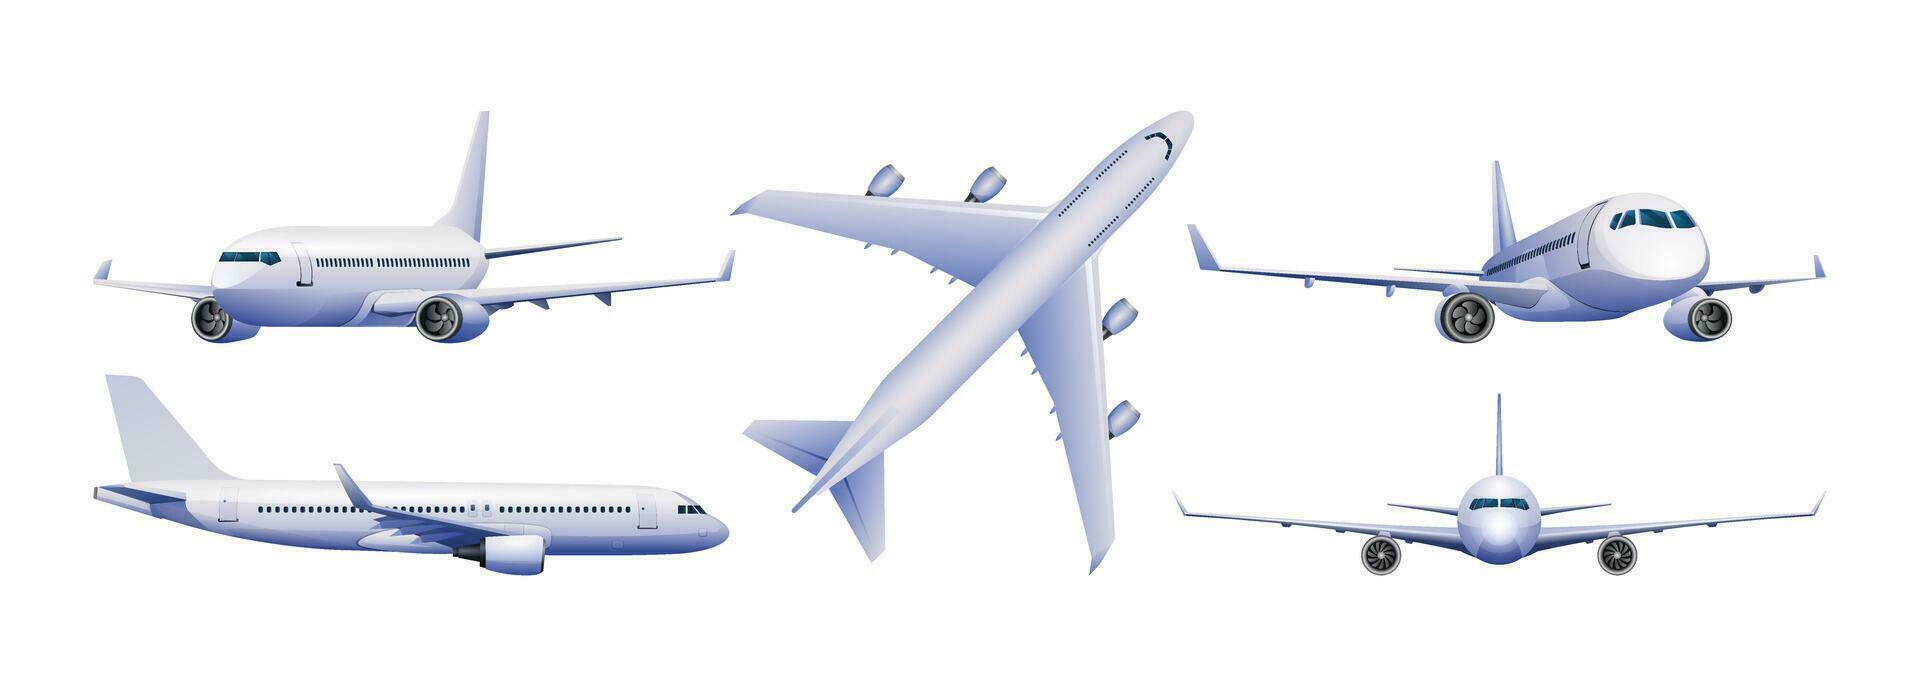 Set of airplane in different views vector illustration isolated on white background